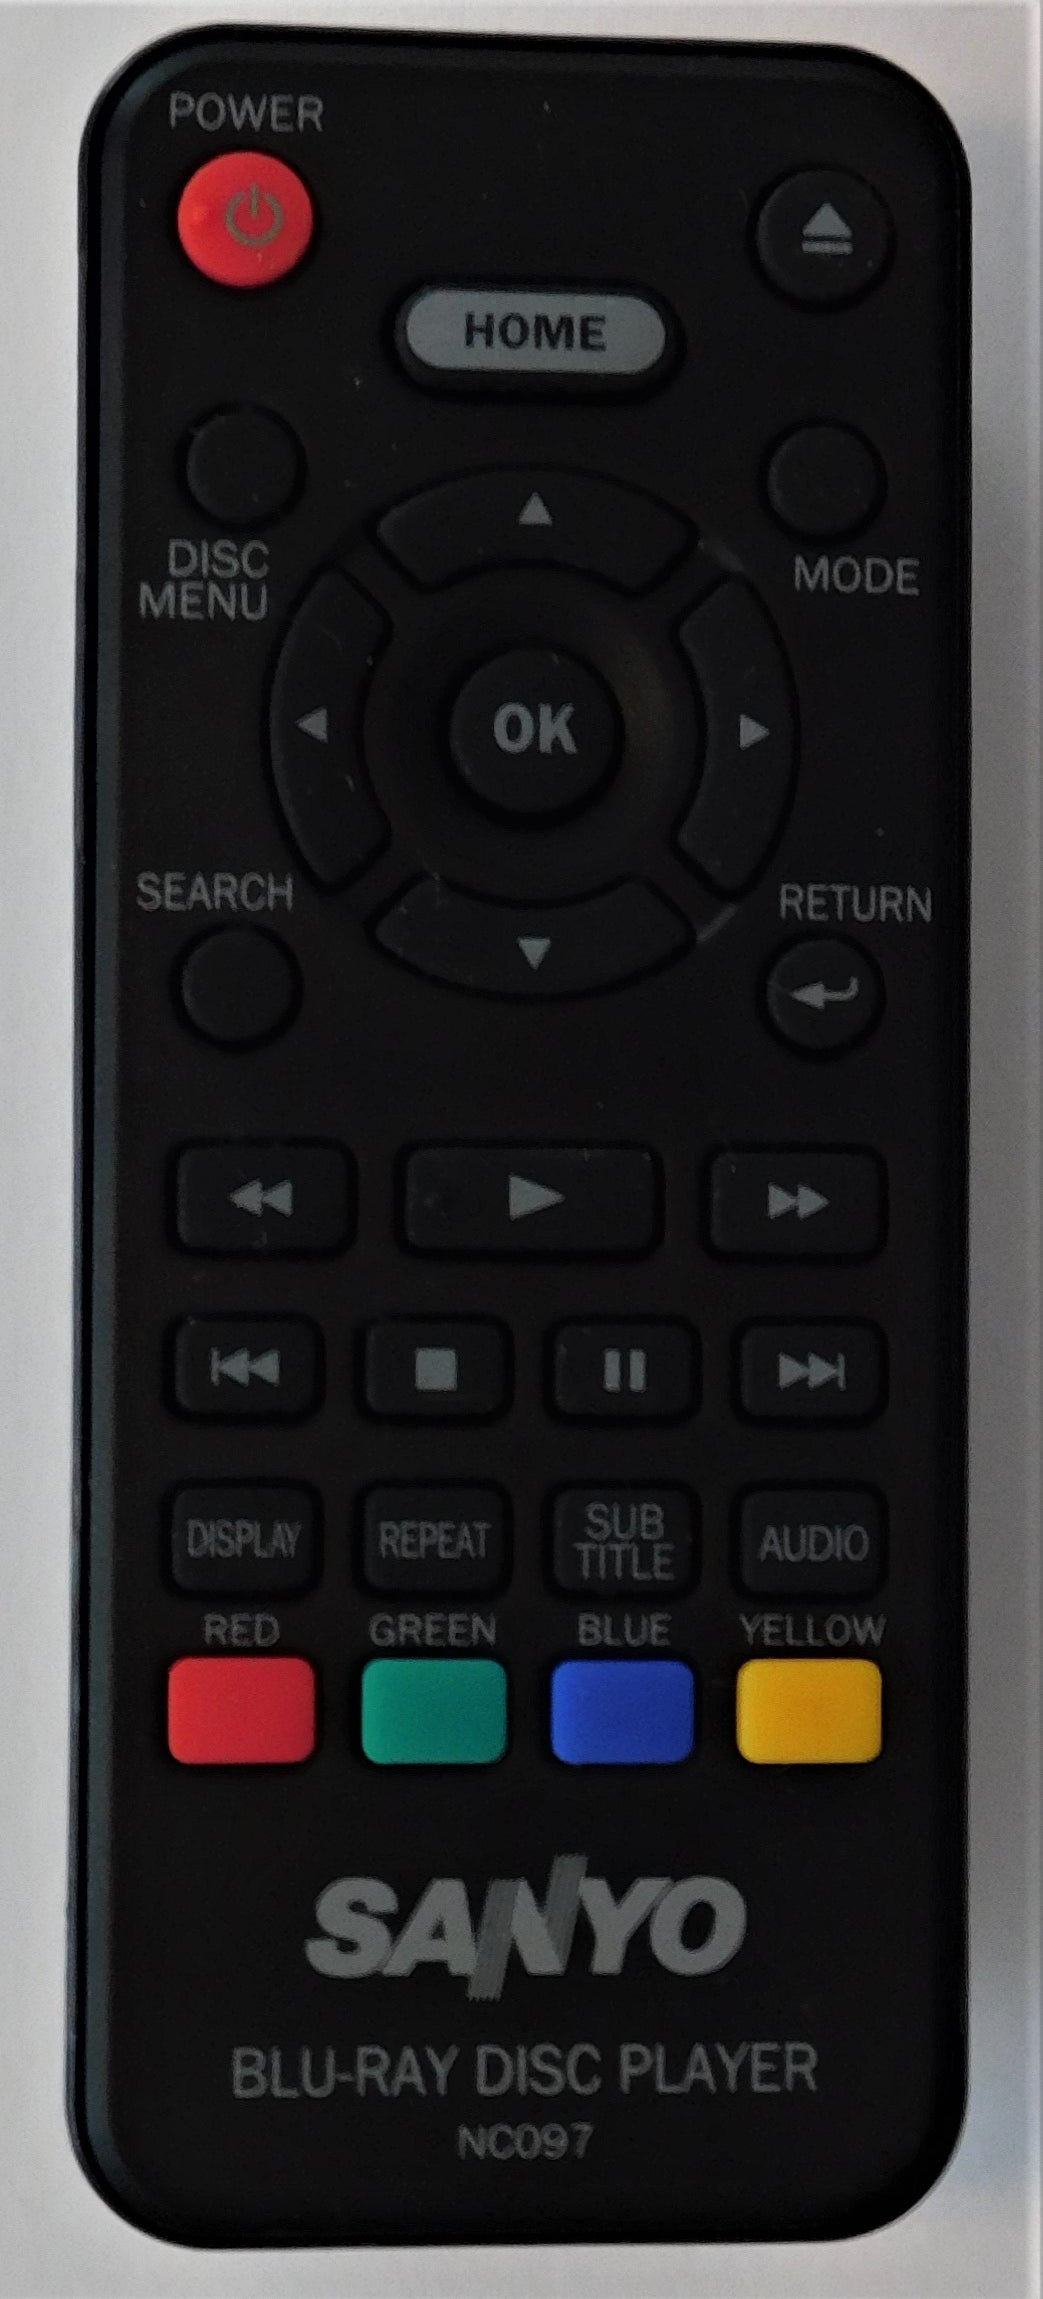 OEM replacement remote control for Sanyo Blu-ray players NC097UL